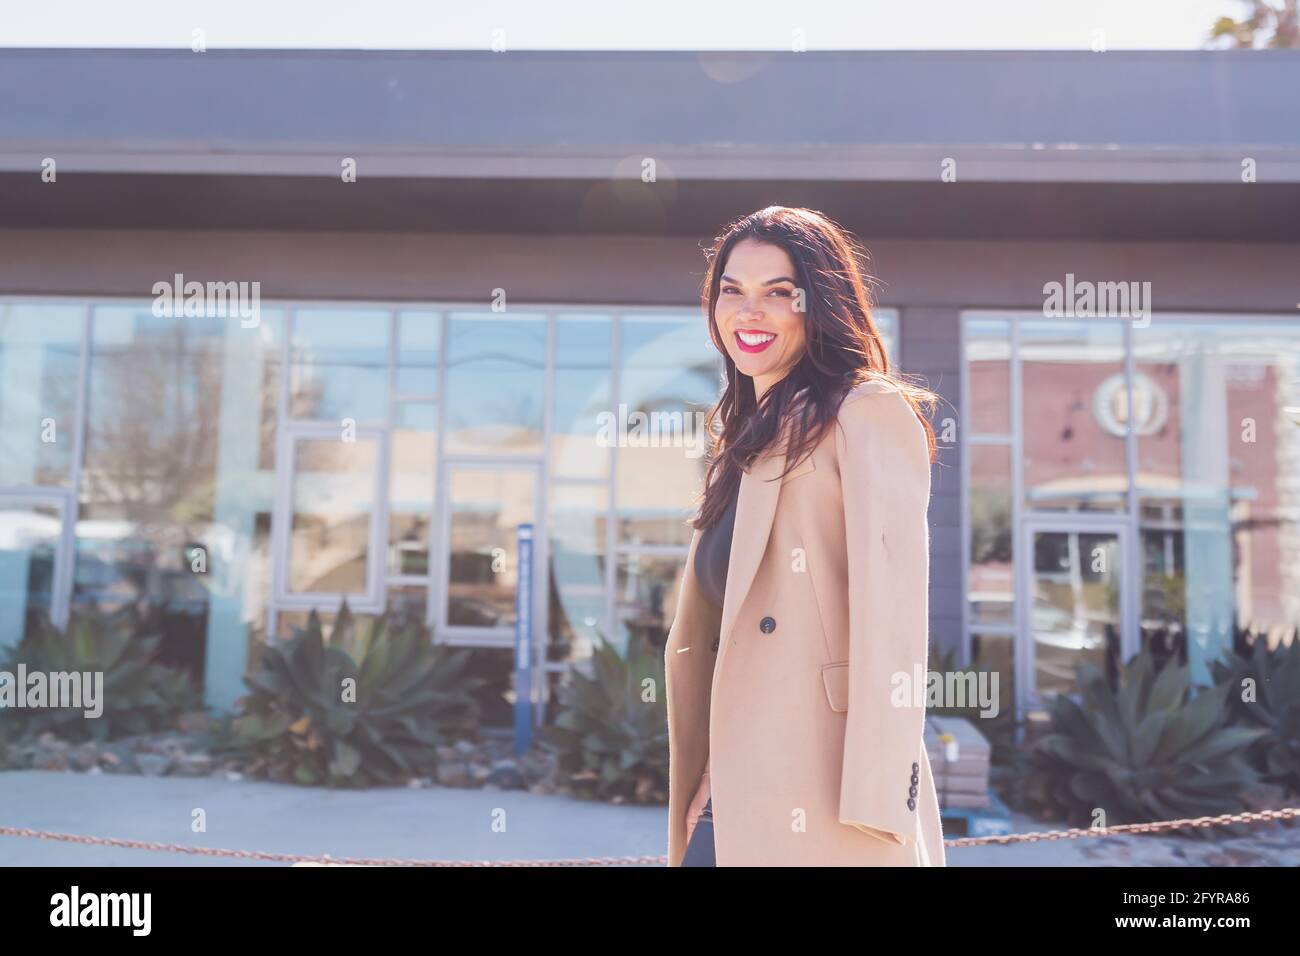 Business woman walking on the sidewalk with a big smile on her face. Stock Photo